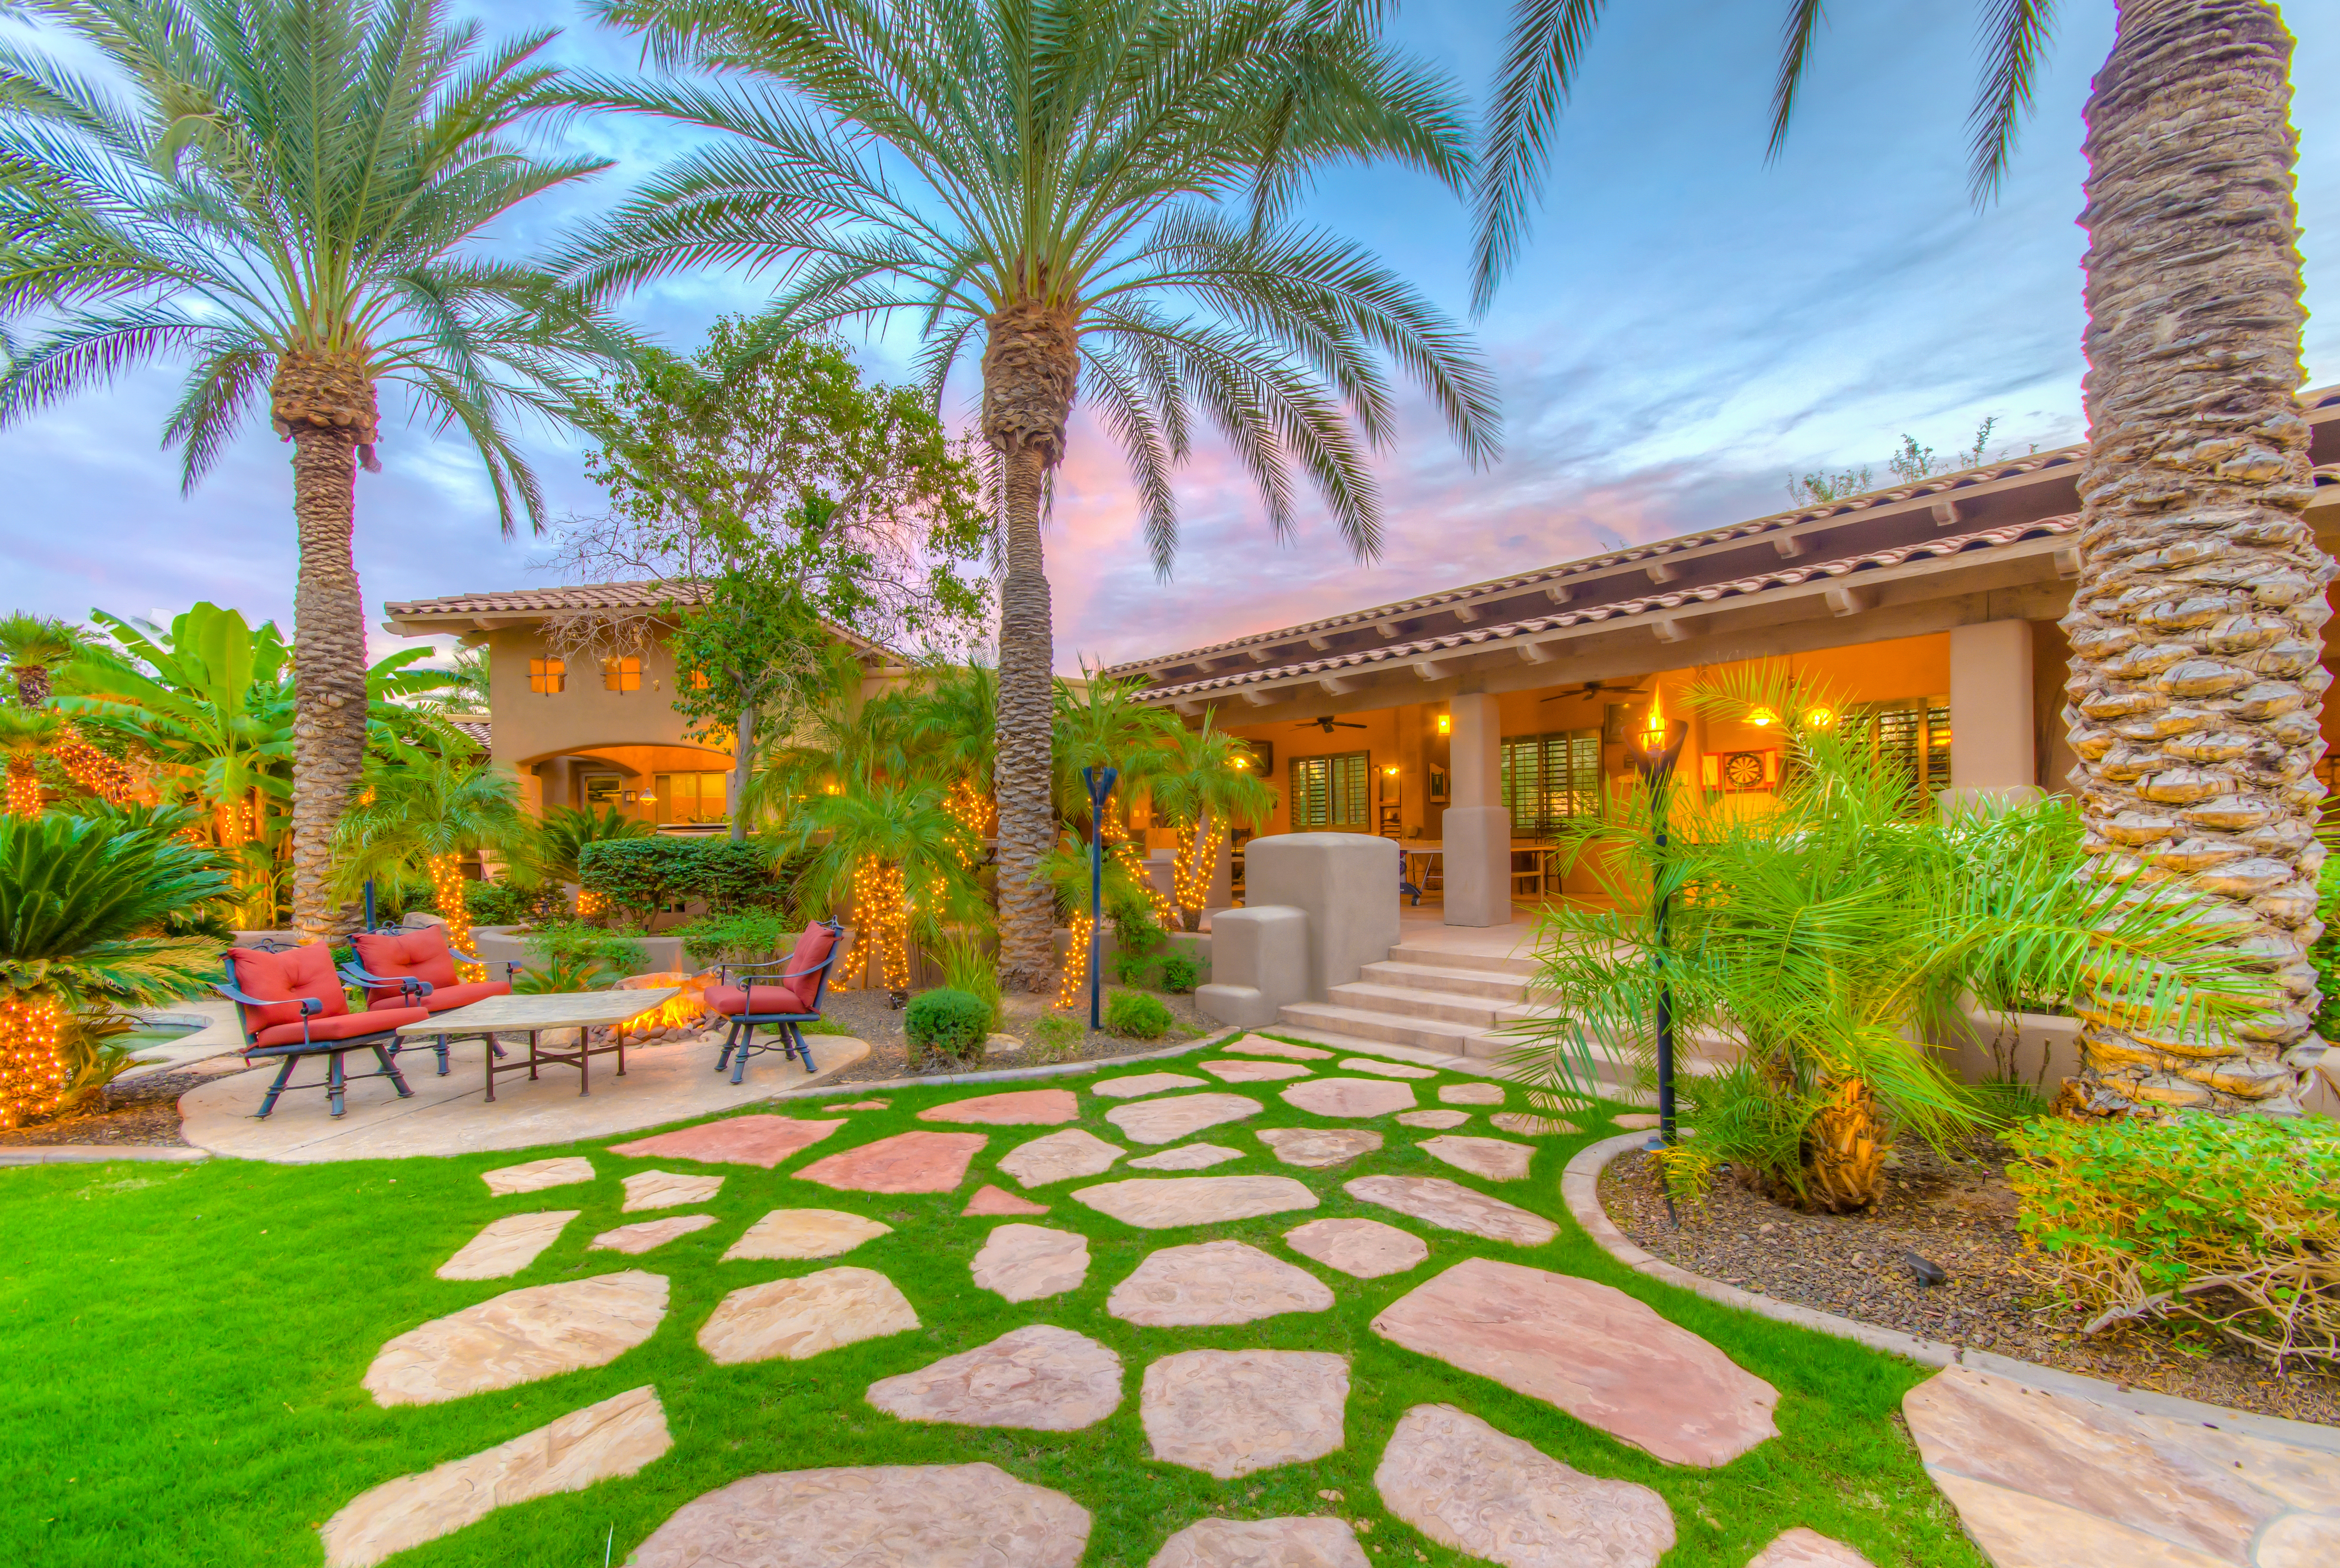 Grand Entrance to our Scottsdale AZ Vacation Home Rental - Image 9